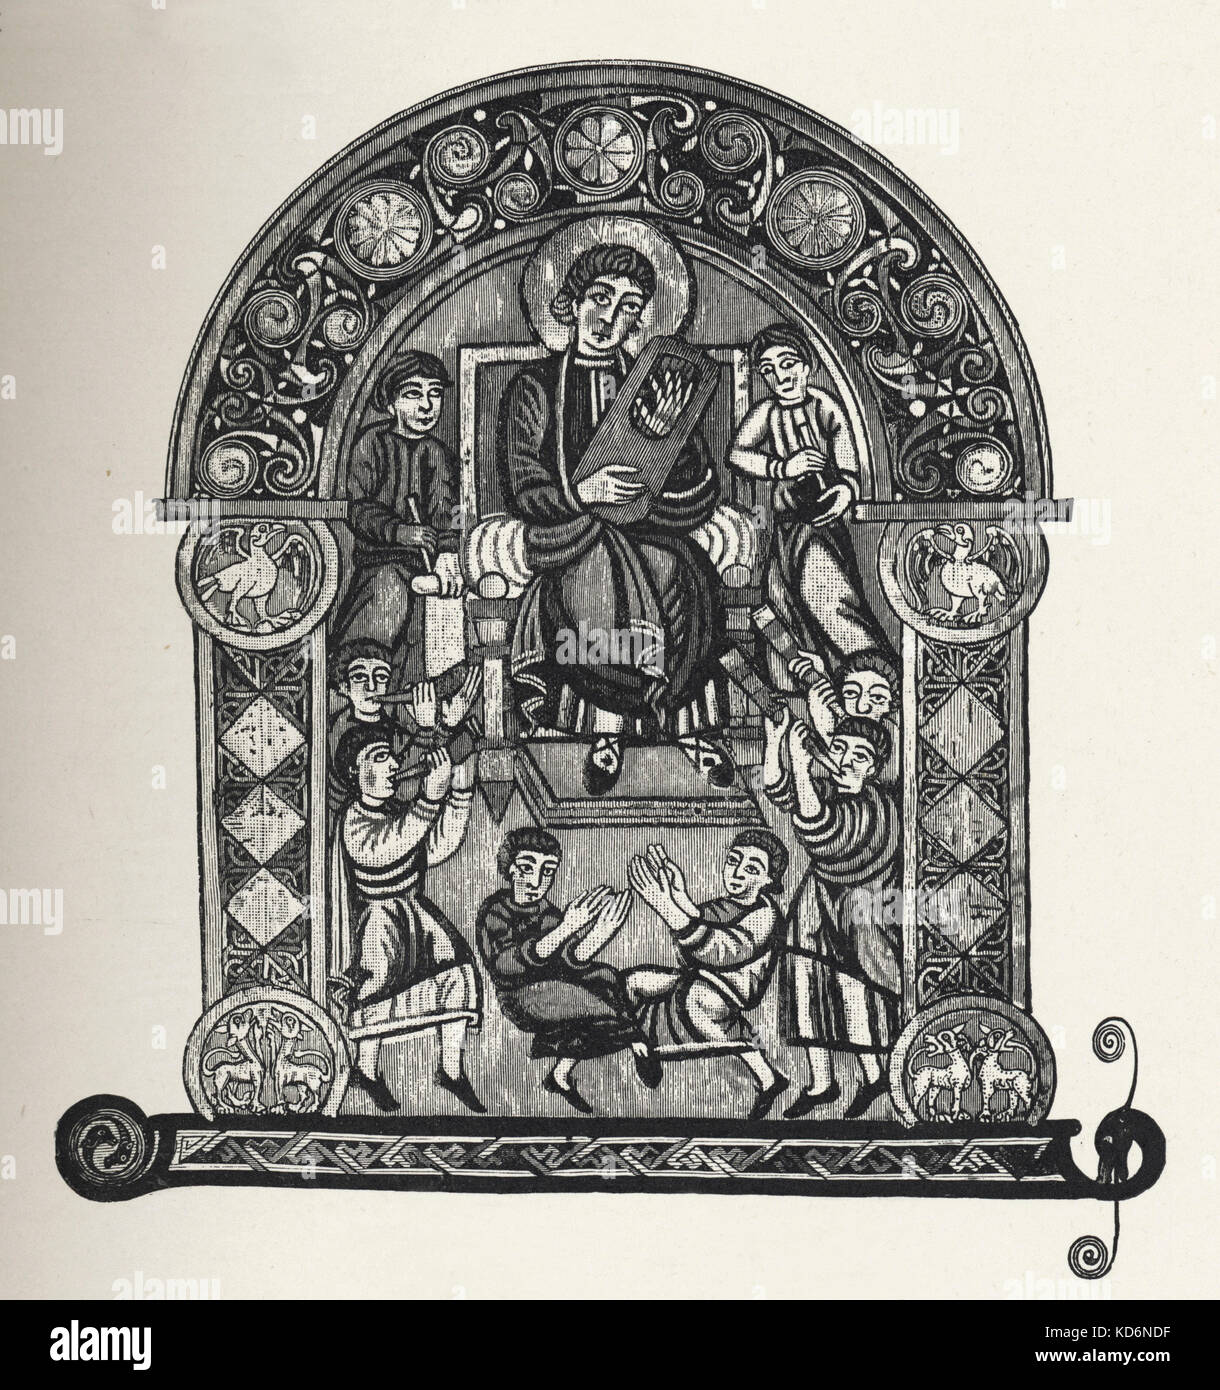 Anglo-Saxon representation of Musicians from a Psalter manuscript - 8th century - British Museum Stock Photo